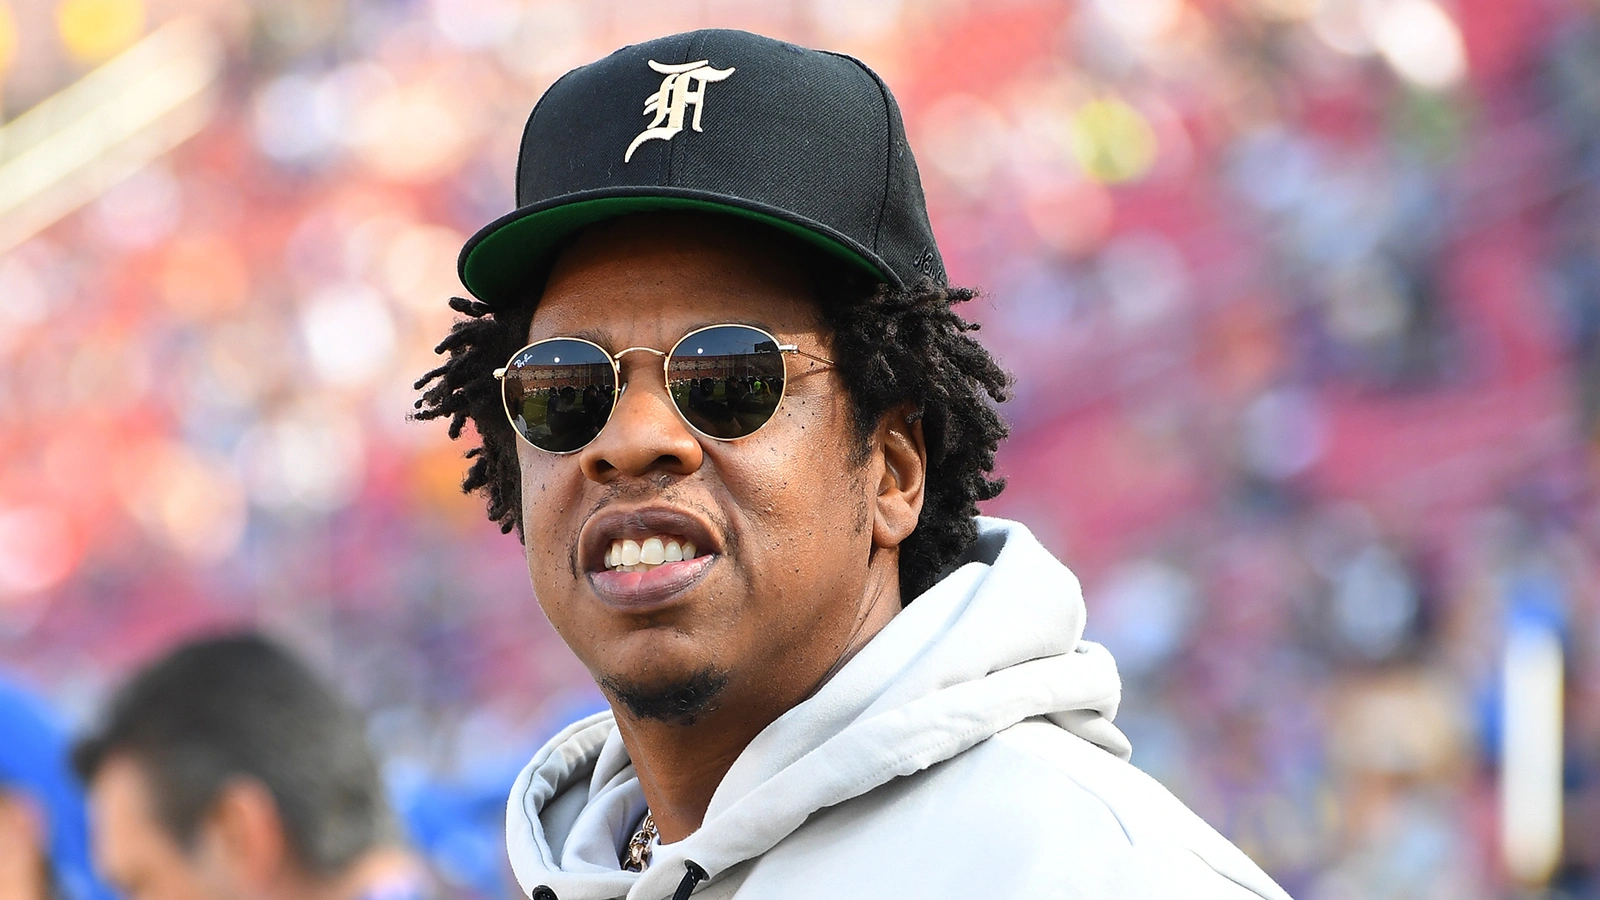 Image of Jay-z, considered as the most influential Hip-Hop artist in history 